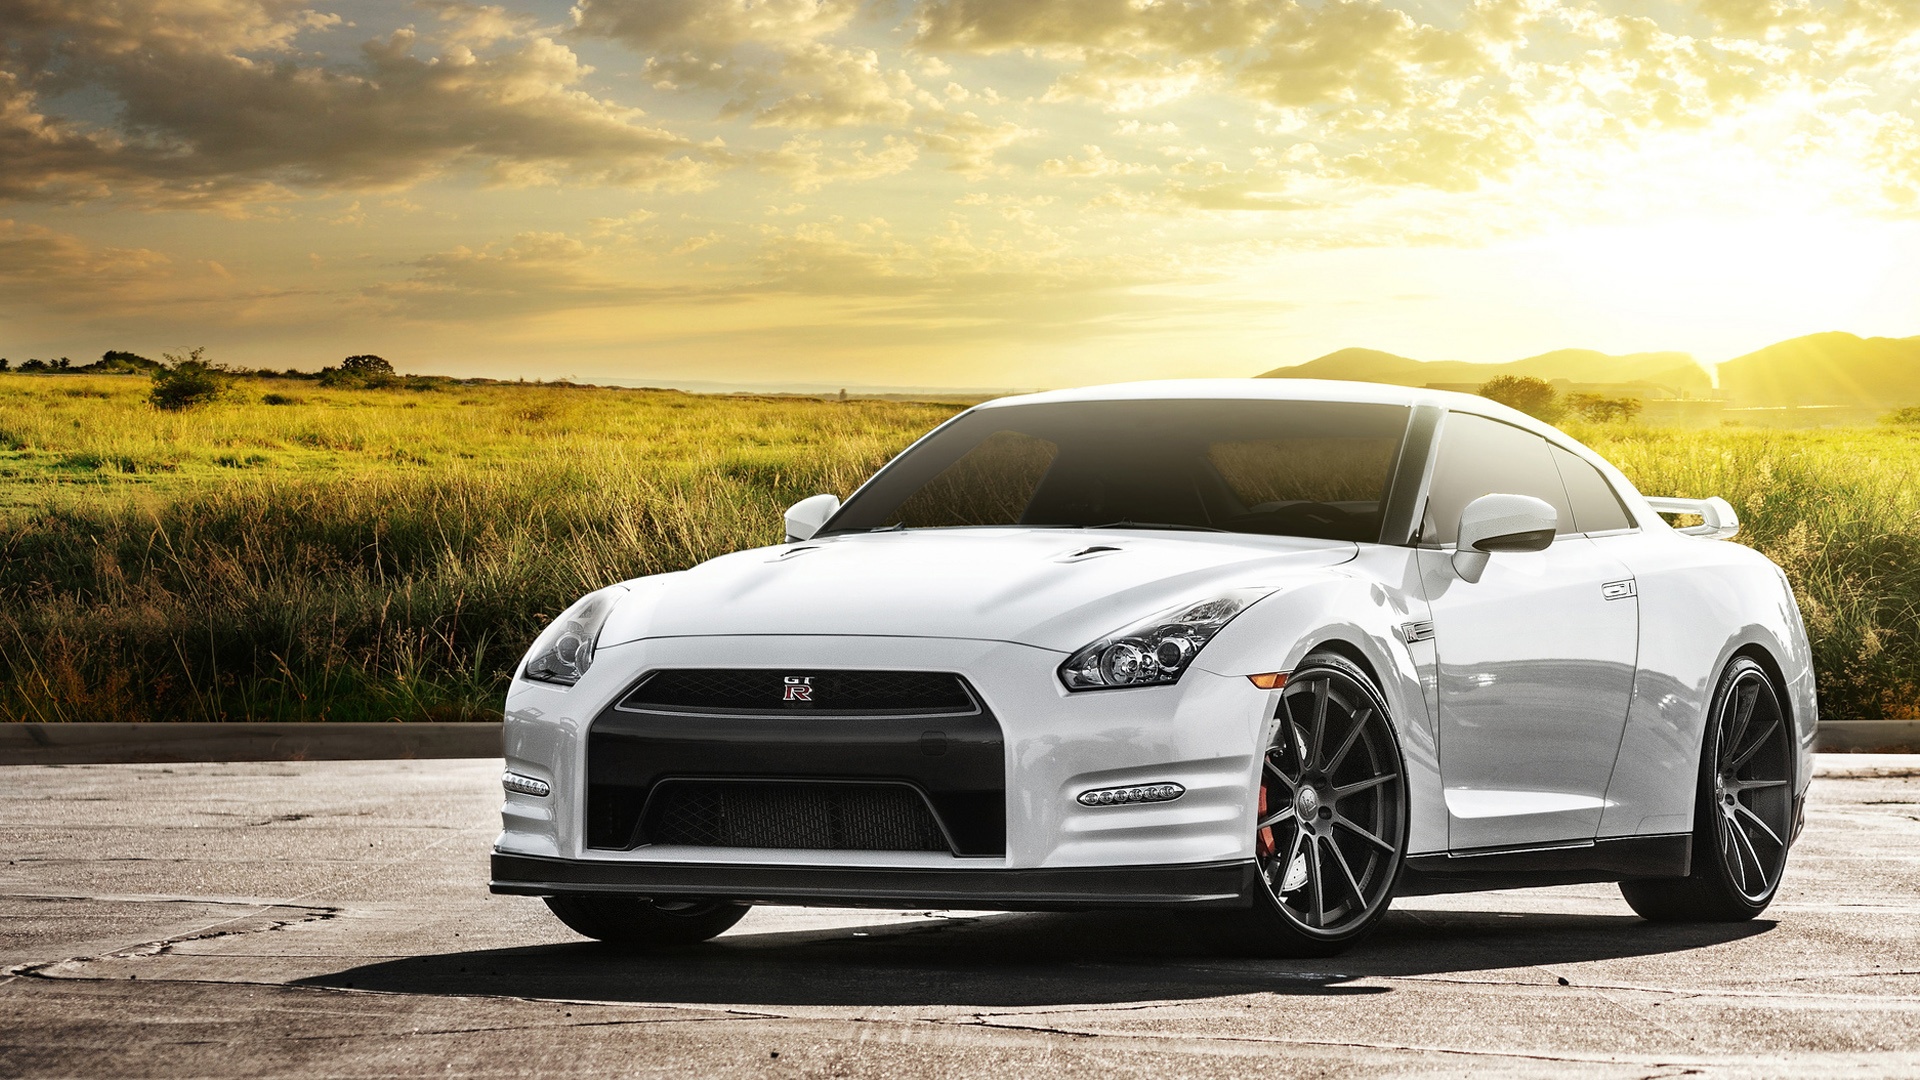 Nissan Gt R Wallpapers Humphrey 13 壁紙 ファンポップ Page 16